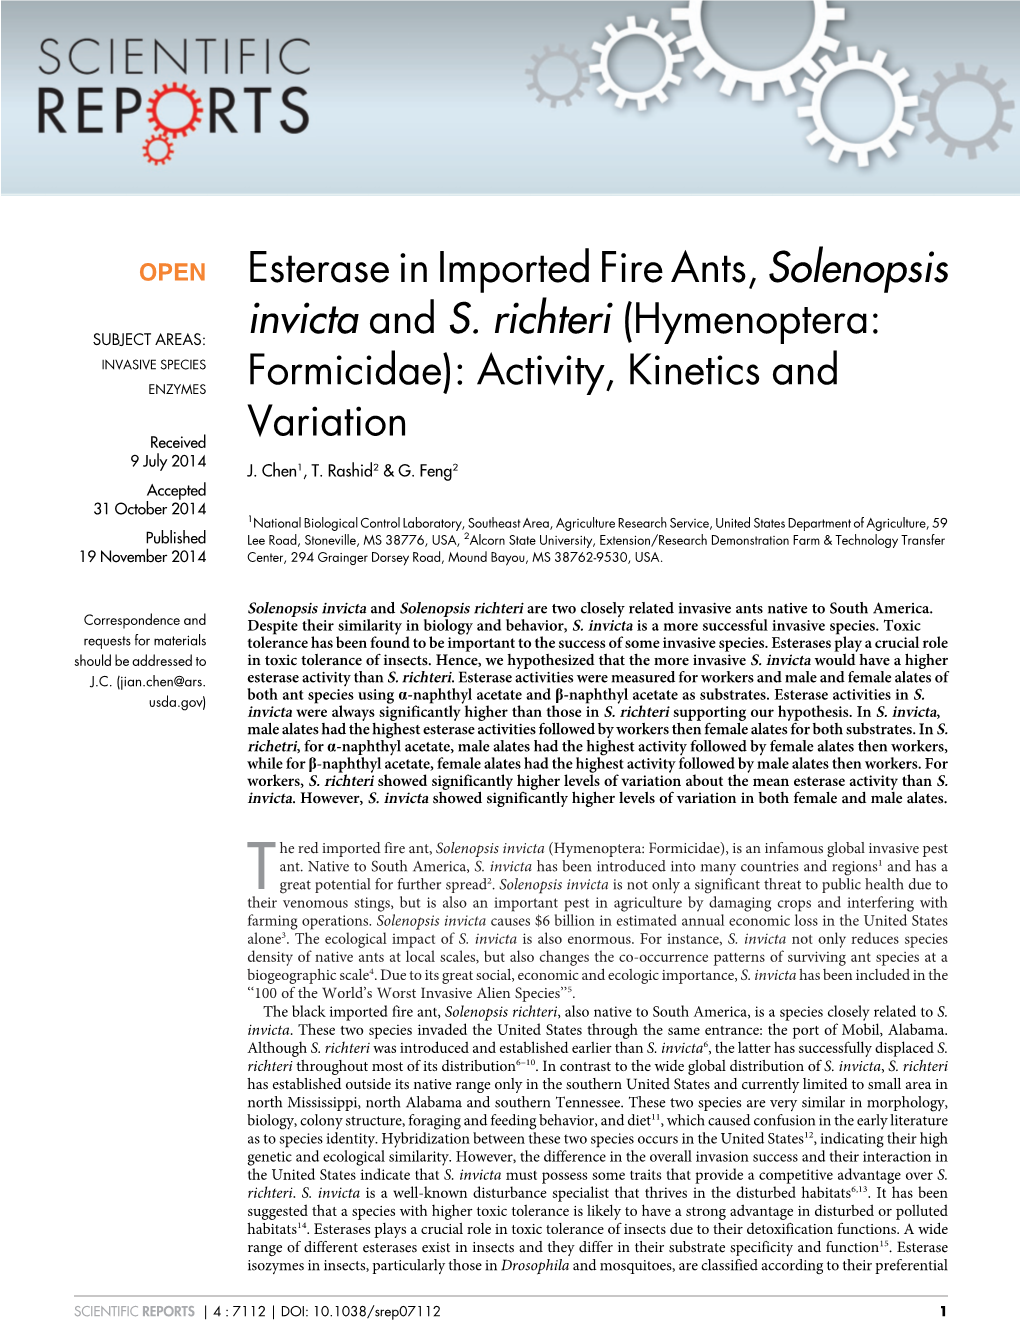 Esterase in Imported Fire Ants, Solenopsis Invicta and S